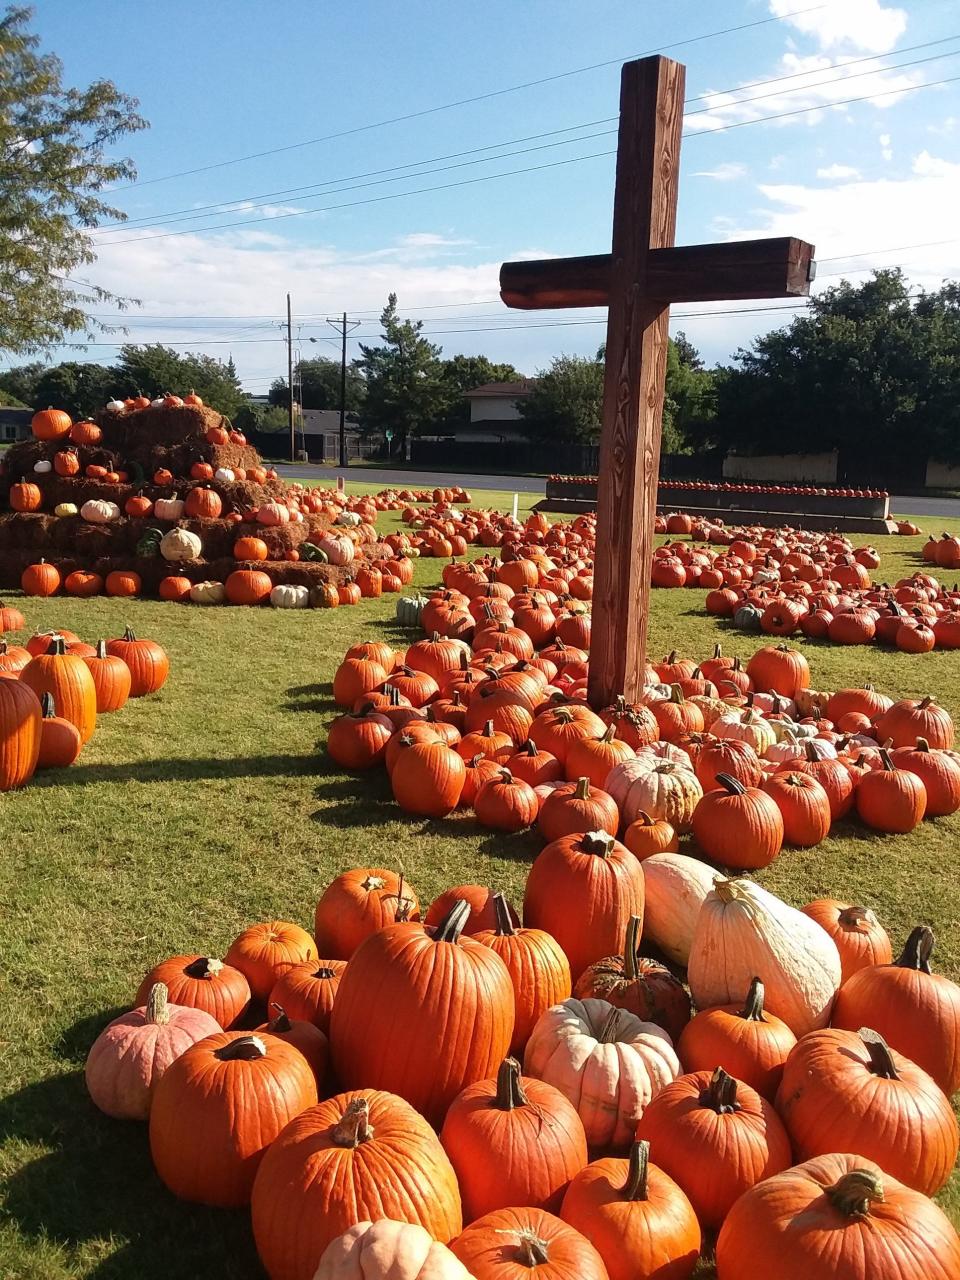 Thousands of pumpkins are expected for this year's 21st Annual Pumpkin Patch at First Cumberland Presbyterian Church, 7702 Indiana Ave.